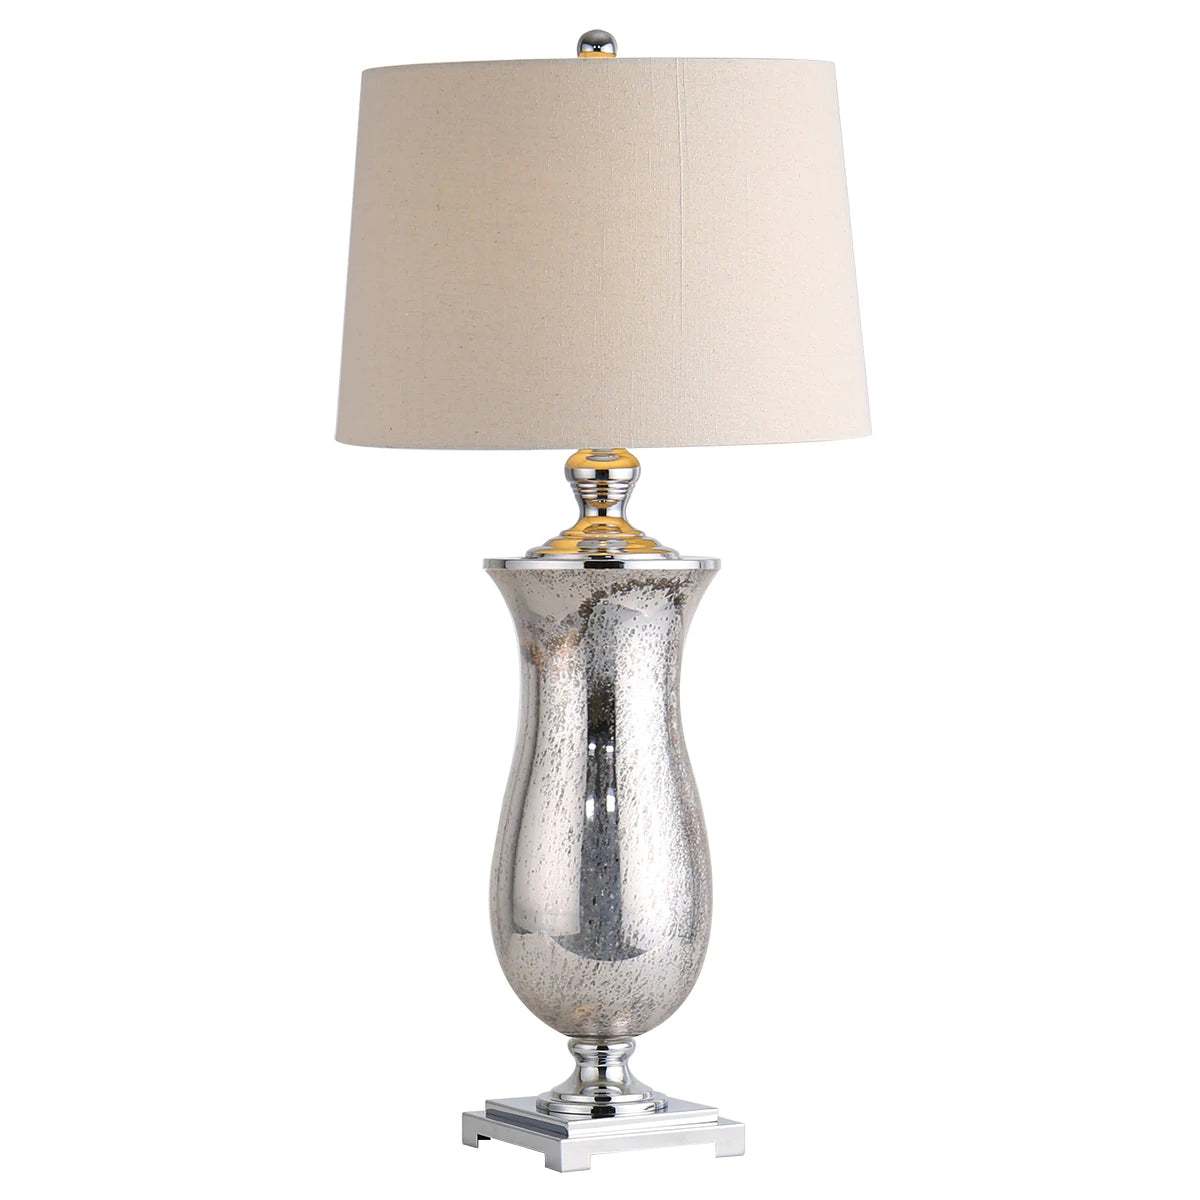 Chelsea Curved Vintage Glass Silver Table Lamp w/Beige Shade